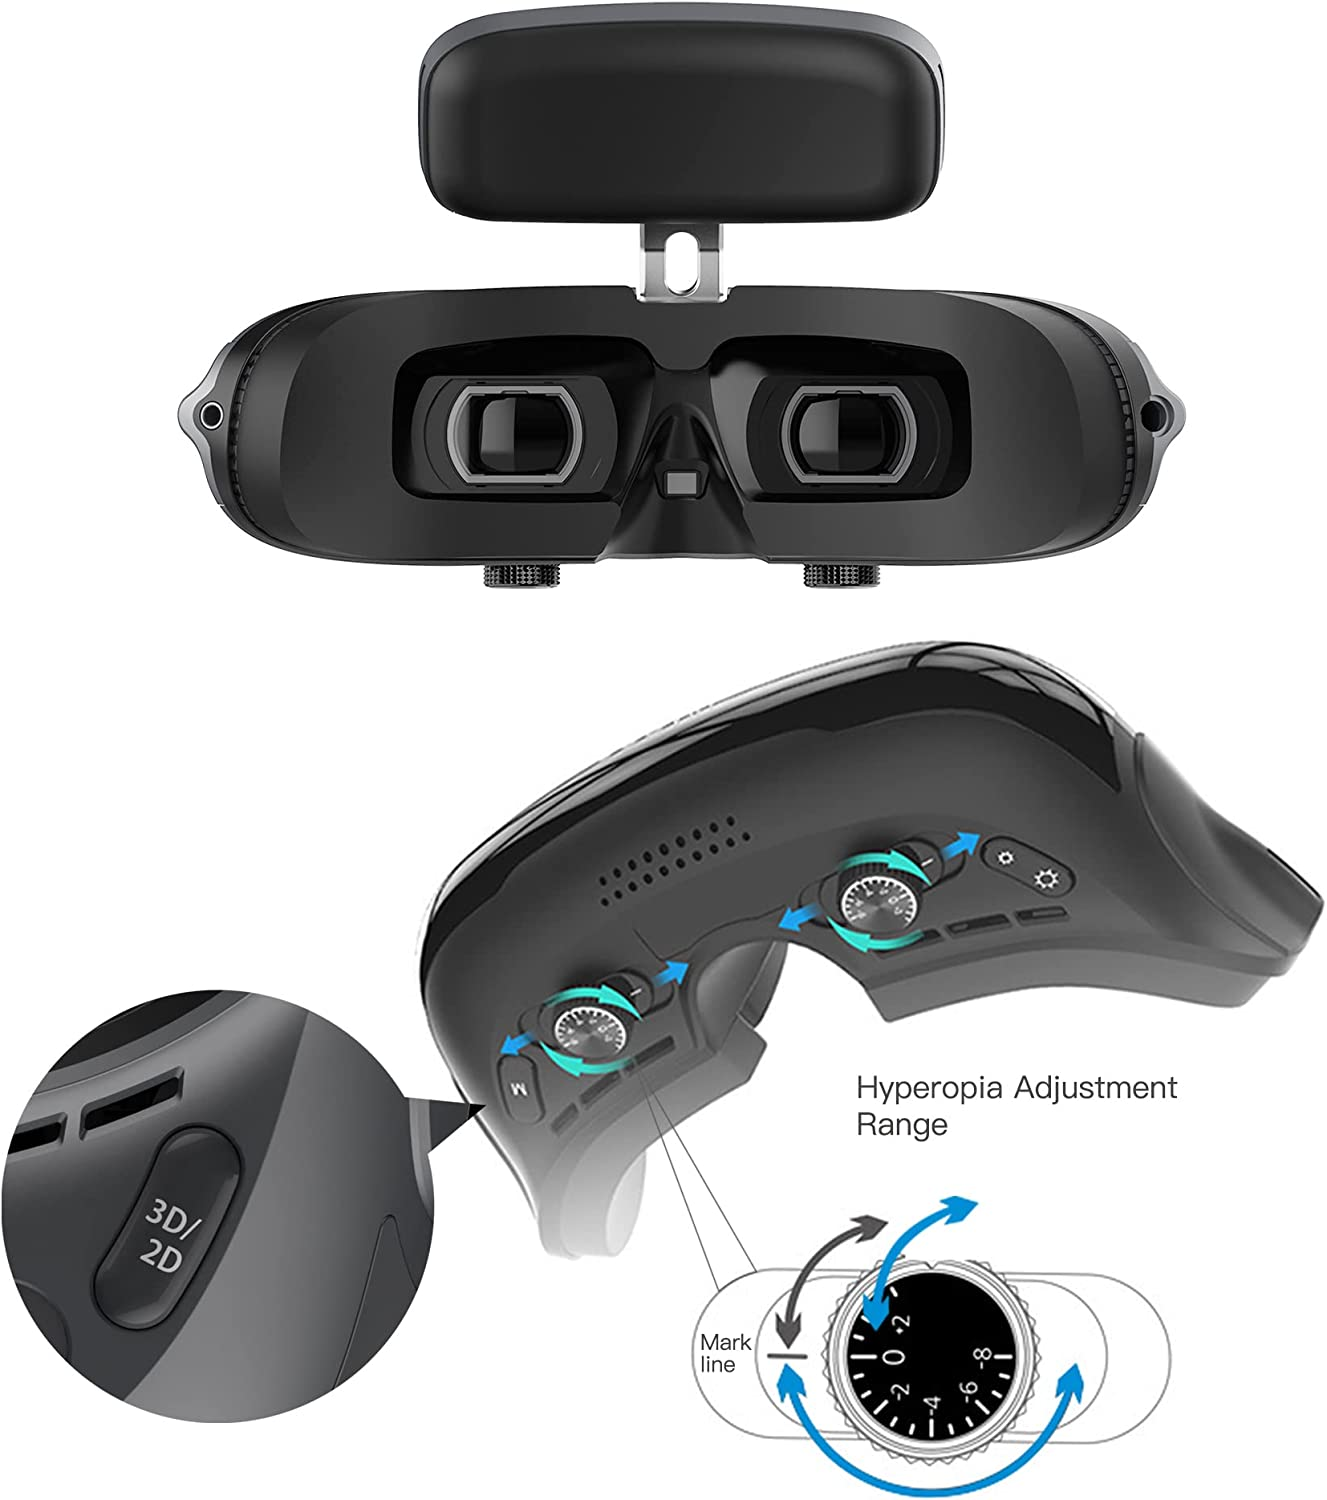 GOOVIS Pro VR Headset with D3 Controller,3D Theater Goggles,Support 4K